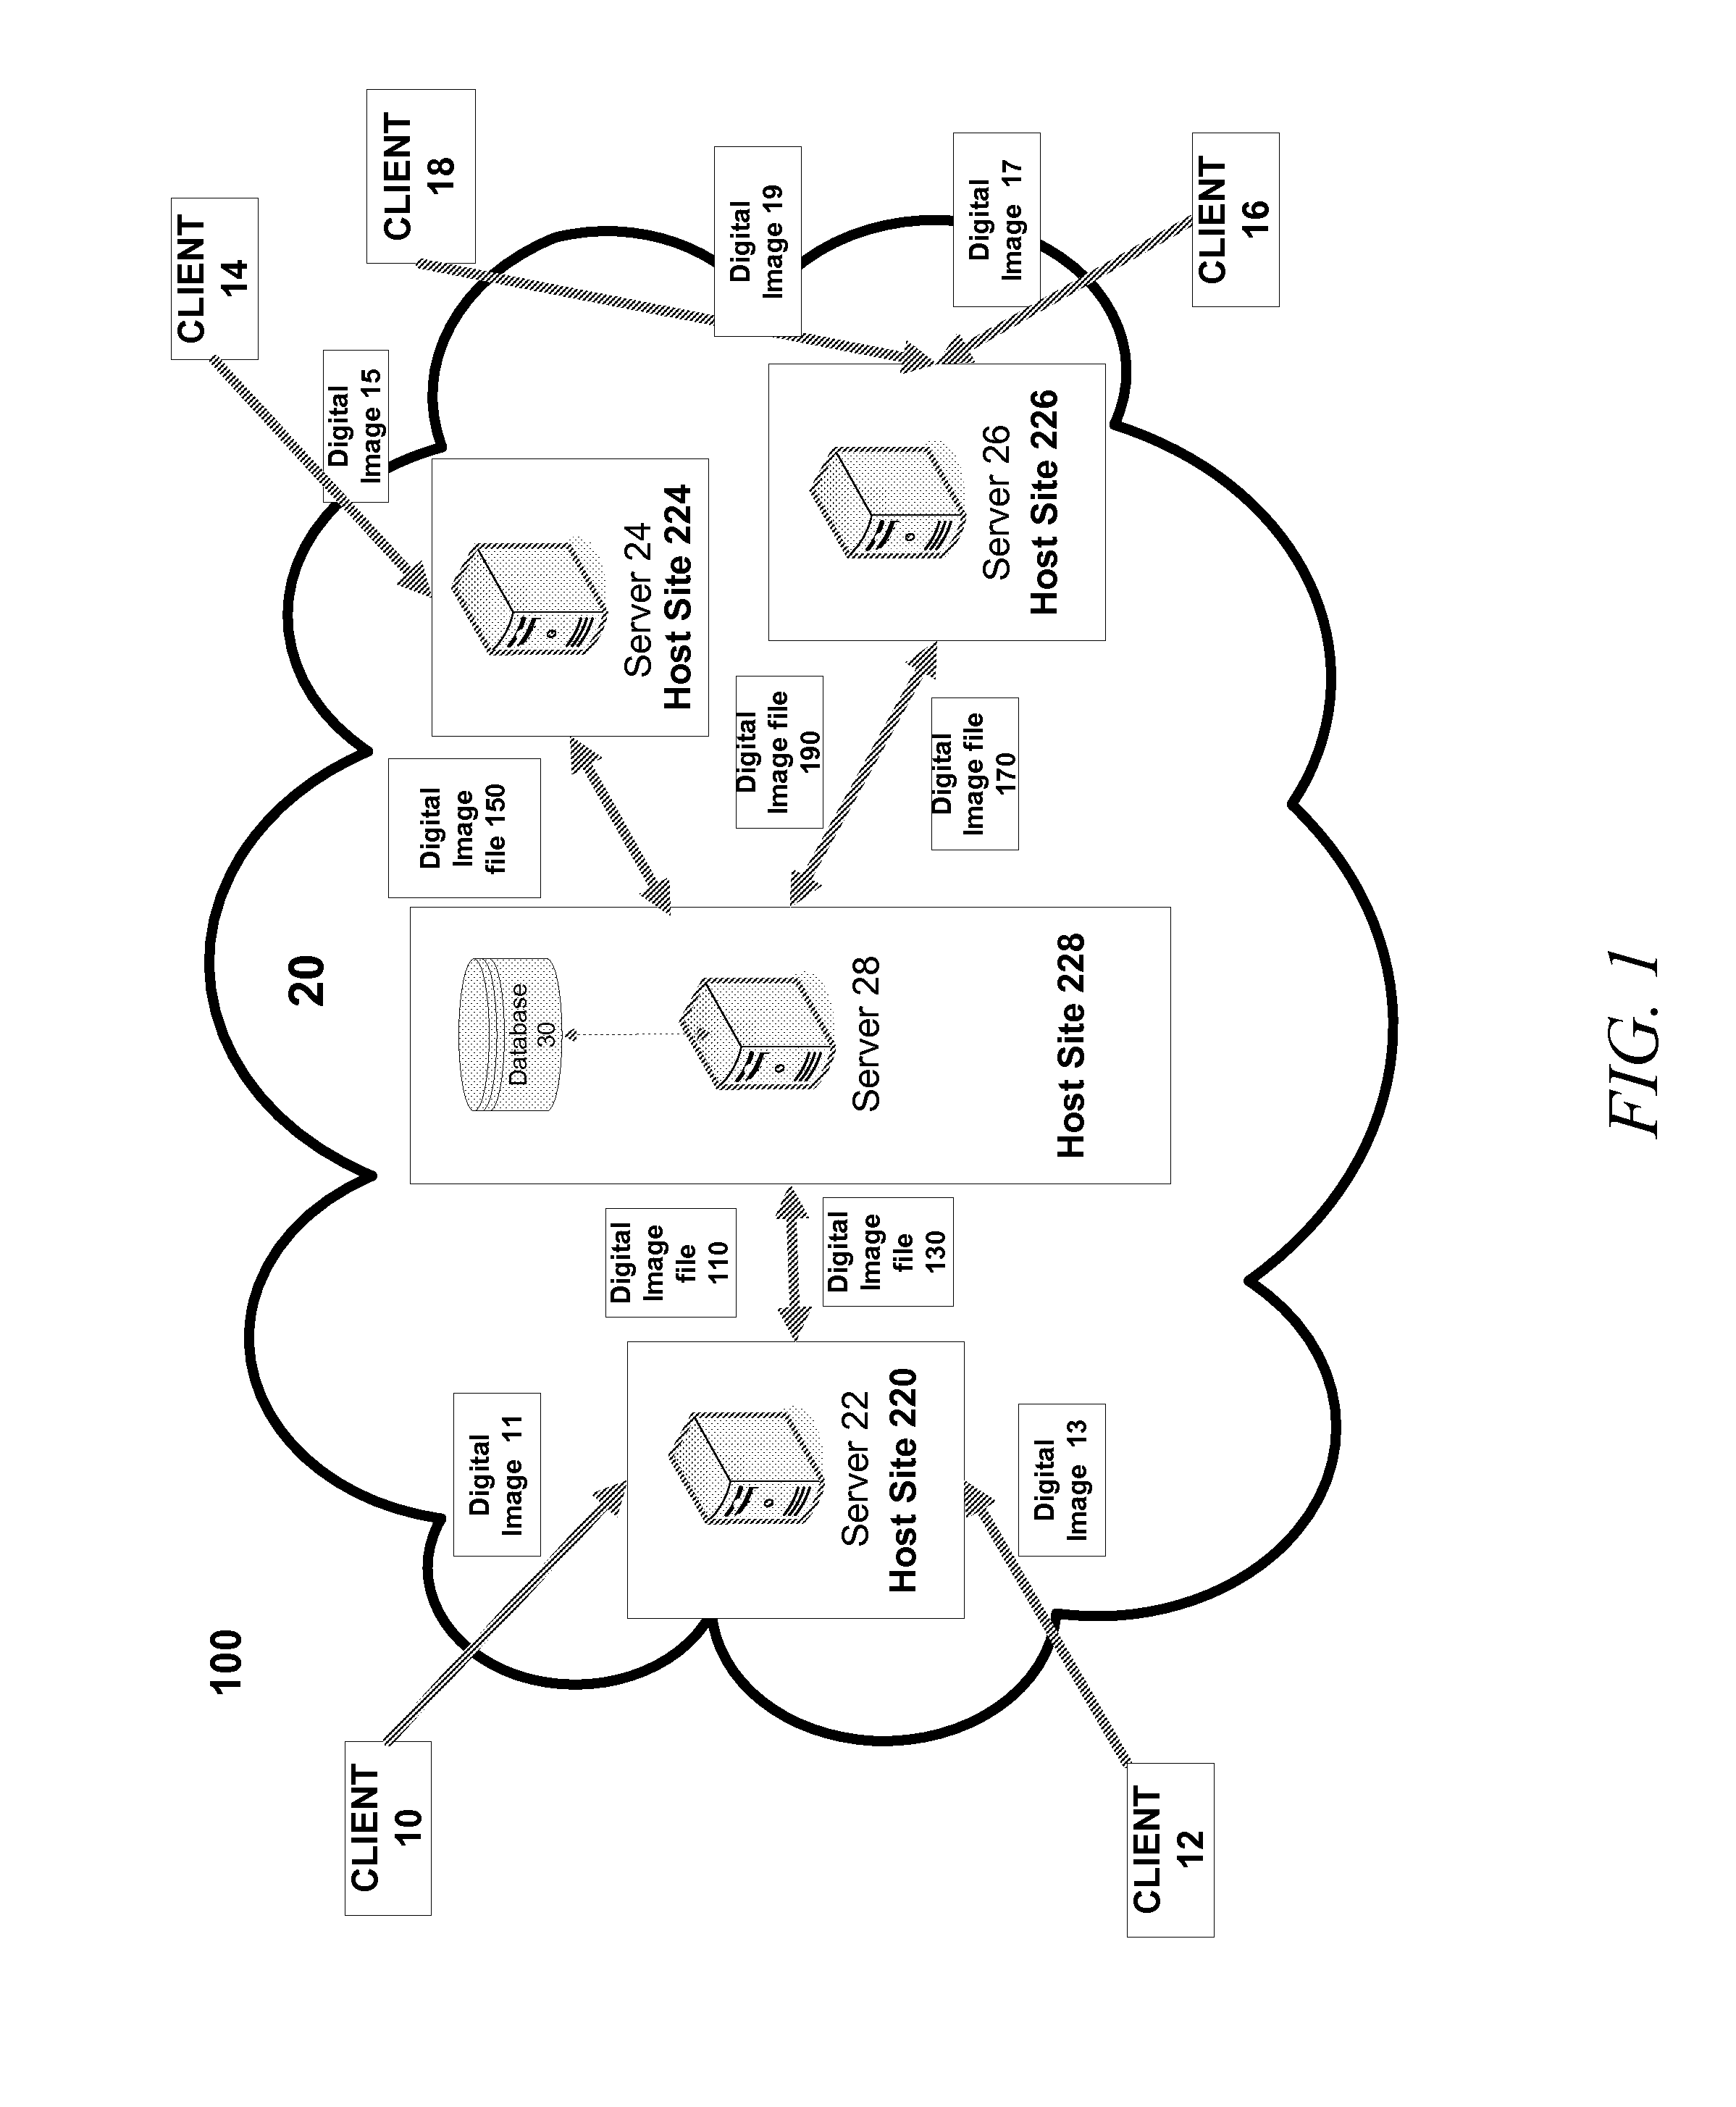 System and method for linking data related to a set of similar images